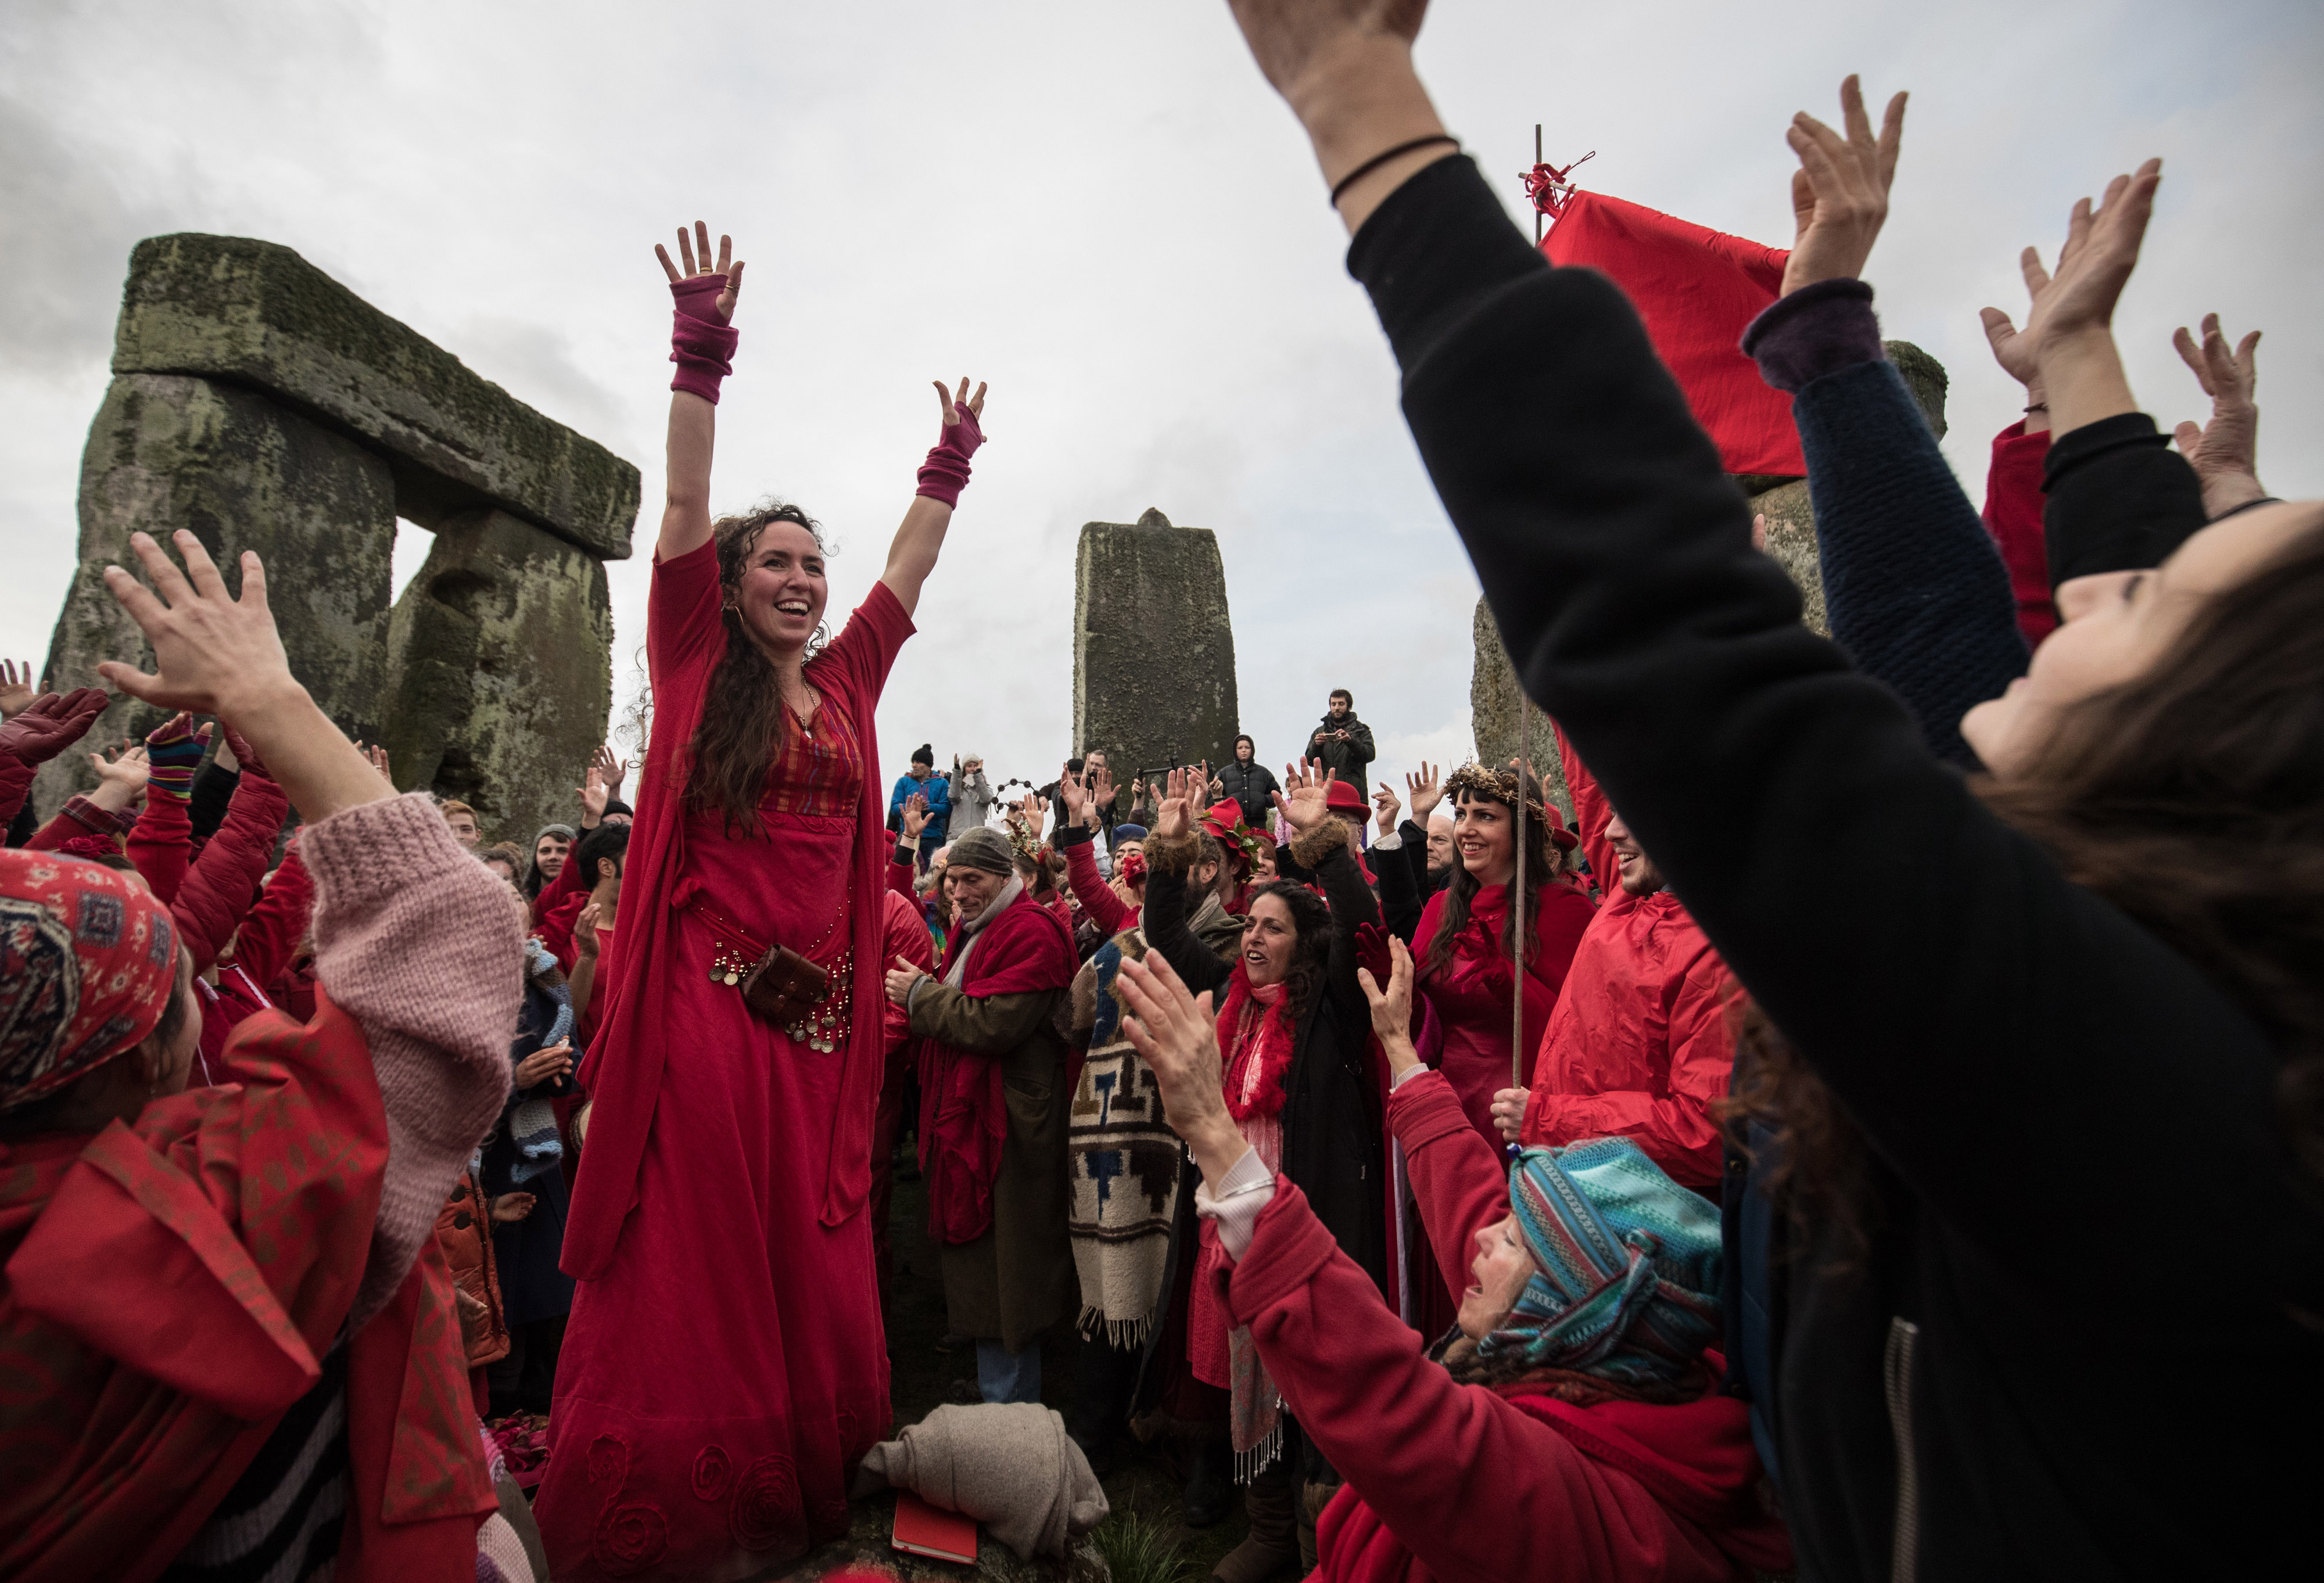 Members of the Shakti Sings choir sing as druids, pagans and revelers gather in the center of Stonehenge in Wiltshire, England to celebrate the 2016 winter solstice. (Matt Cardy&mdash;Getty Images)